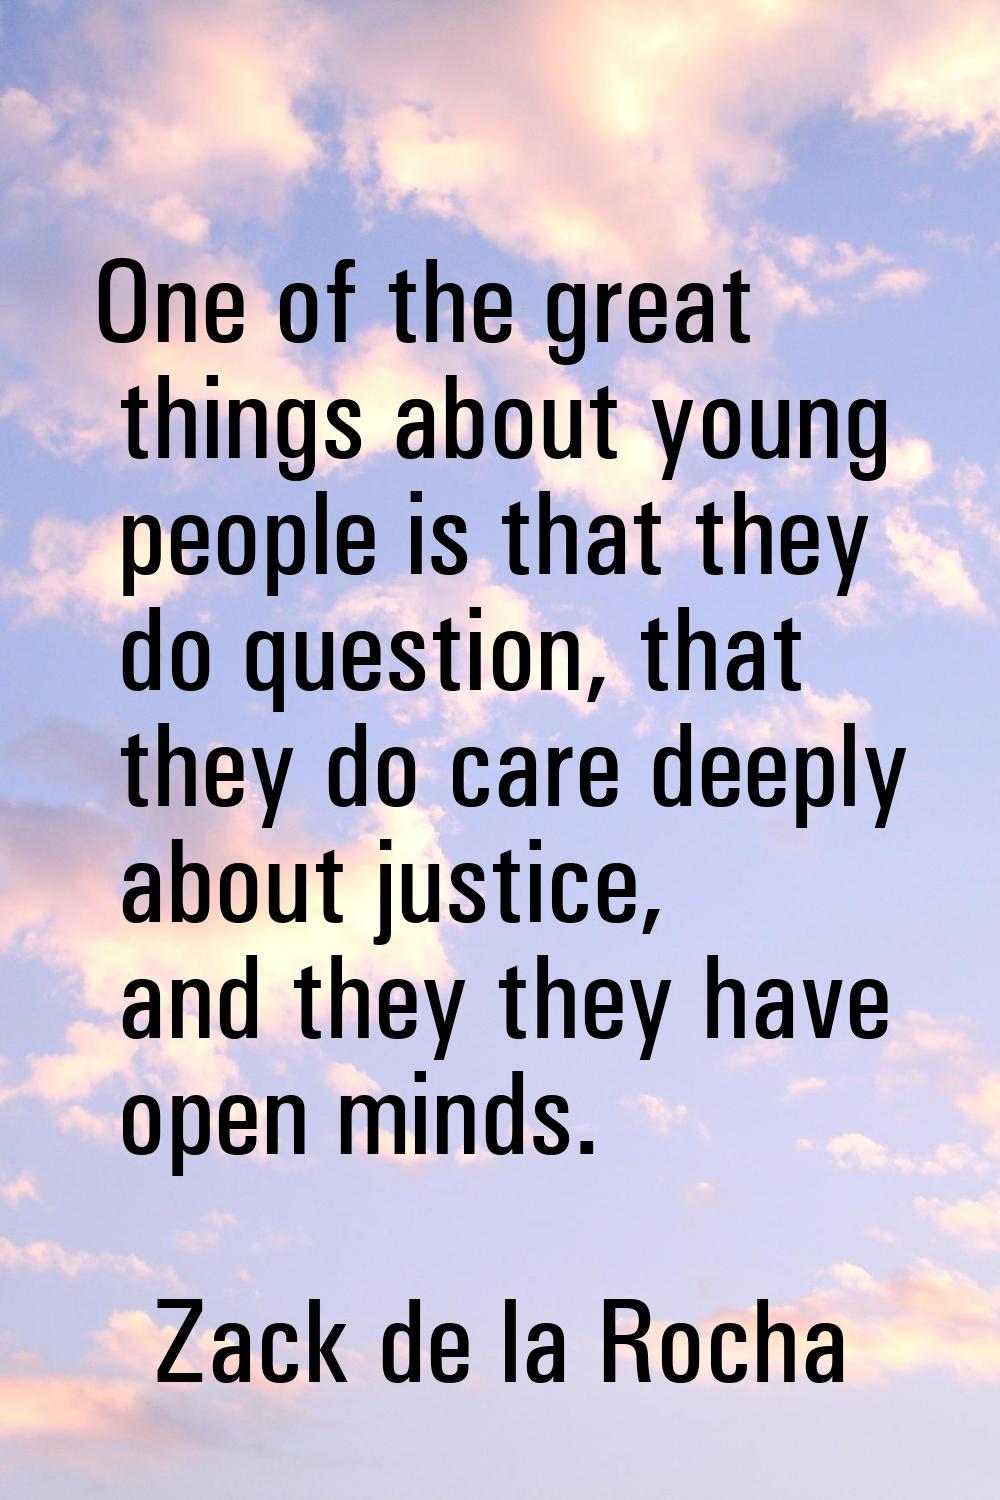 One of the great things about young people is that they do question, that they do care deeply about